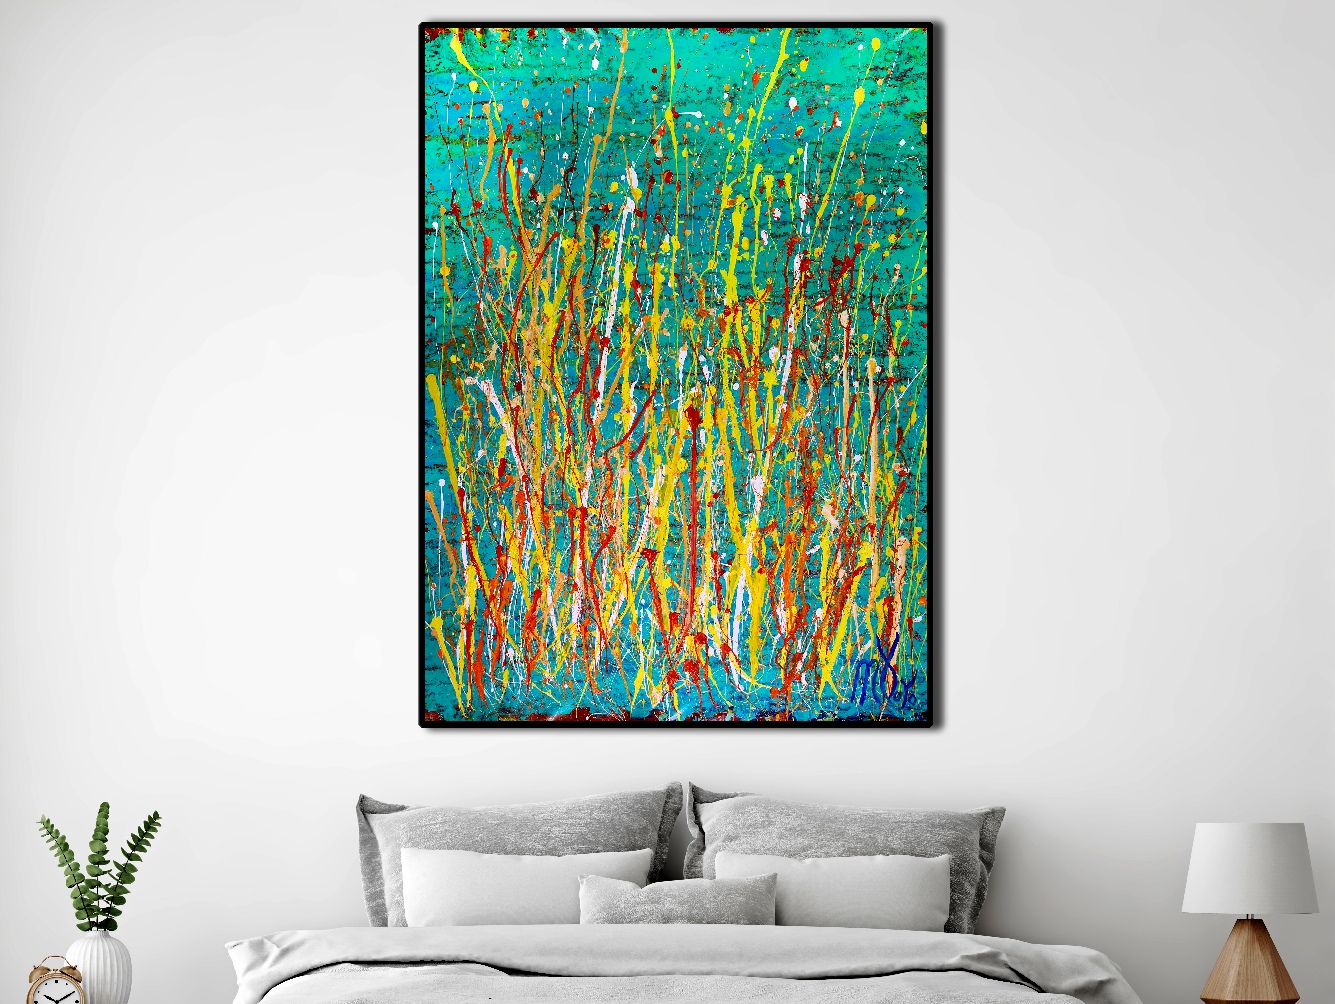 SOLD - Room View / Drizzles frenzy over aqua green (2018) Abstract Acrylic painting by Nestor Toro